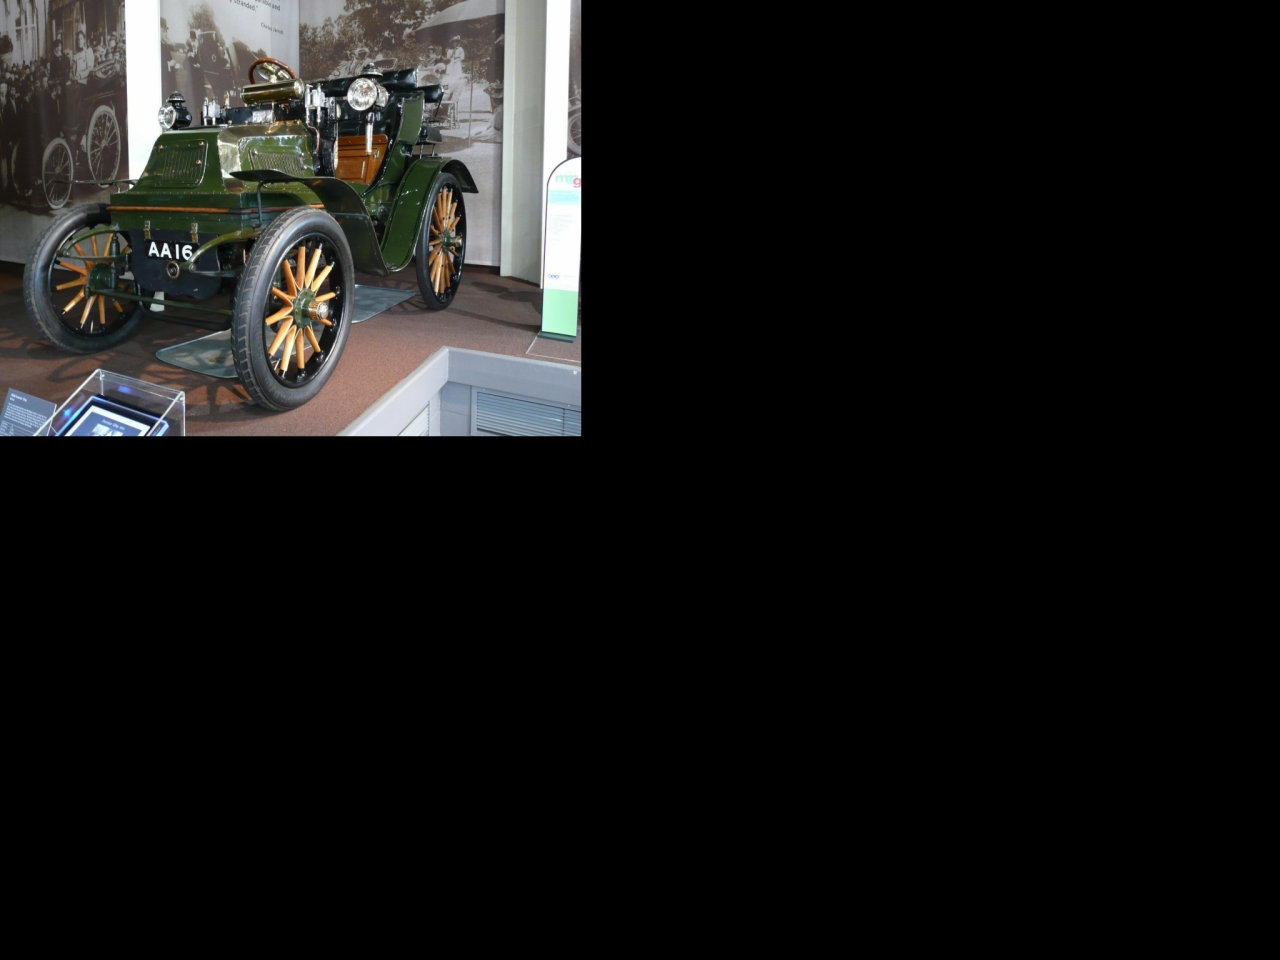 Free Download 1280x960 Resolution of high quality daimler 12 hp ...